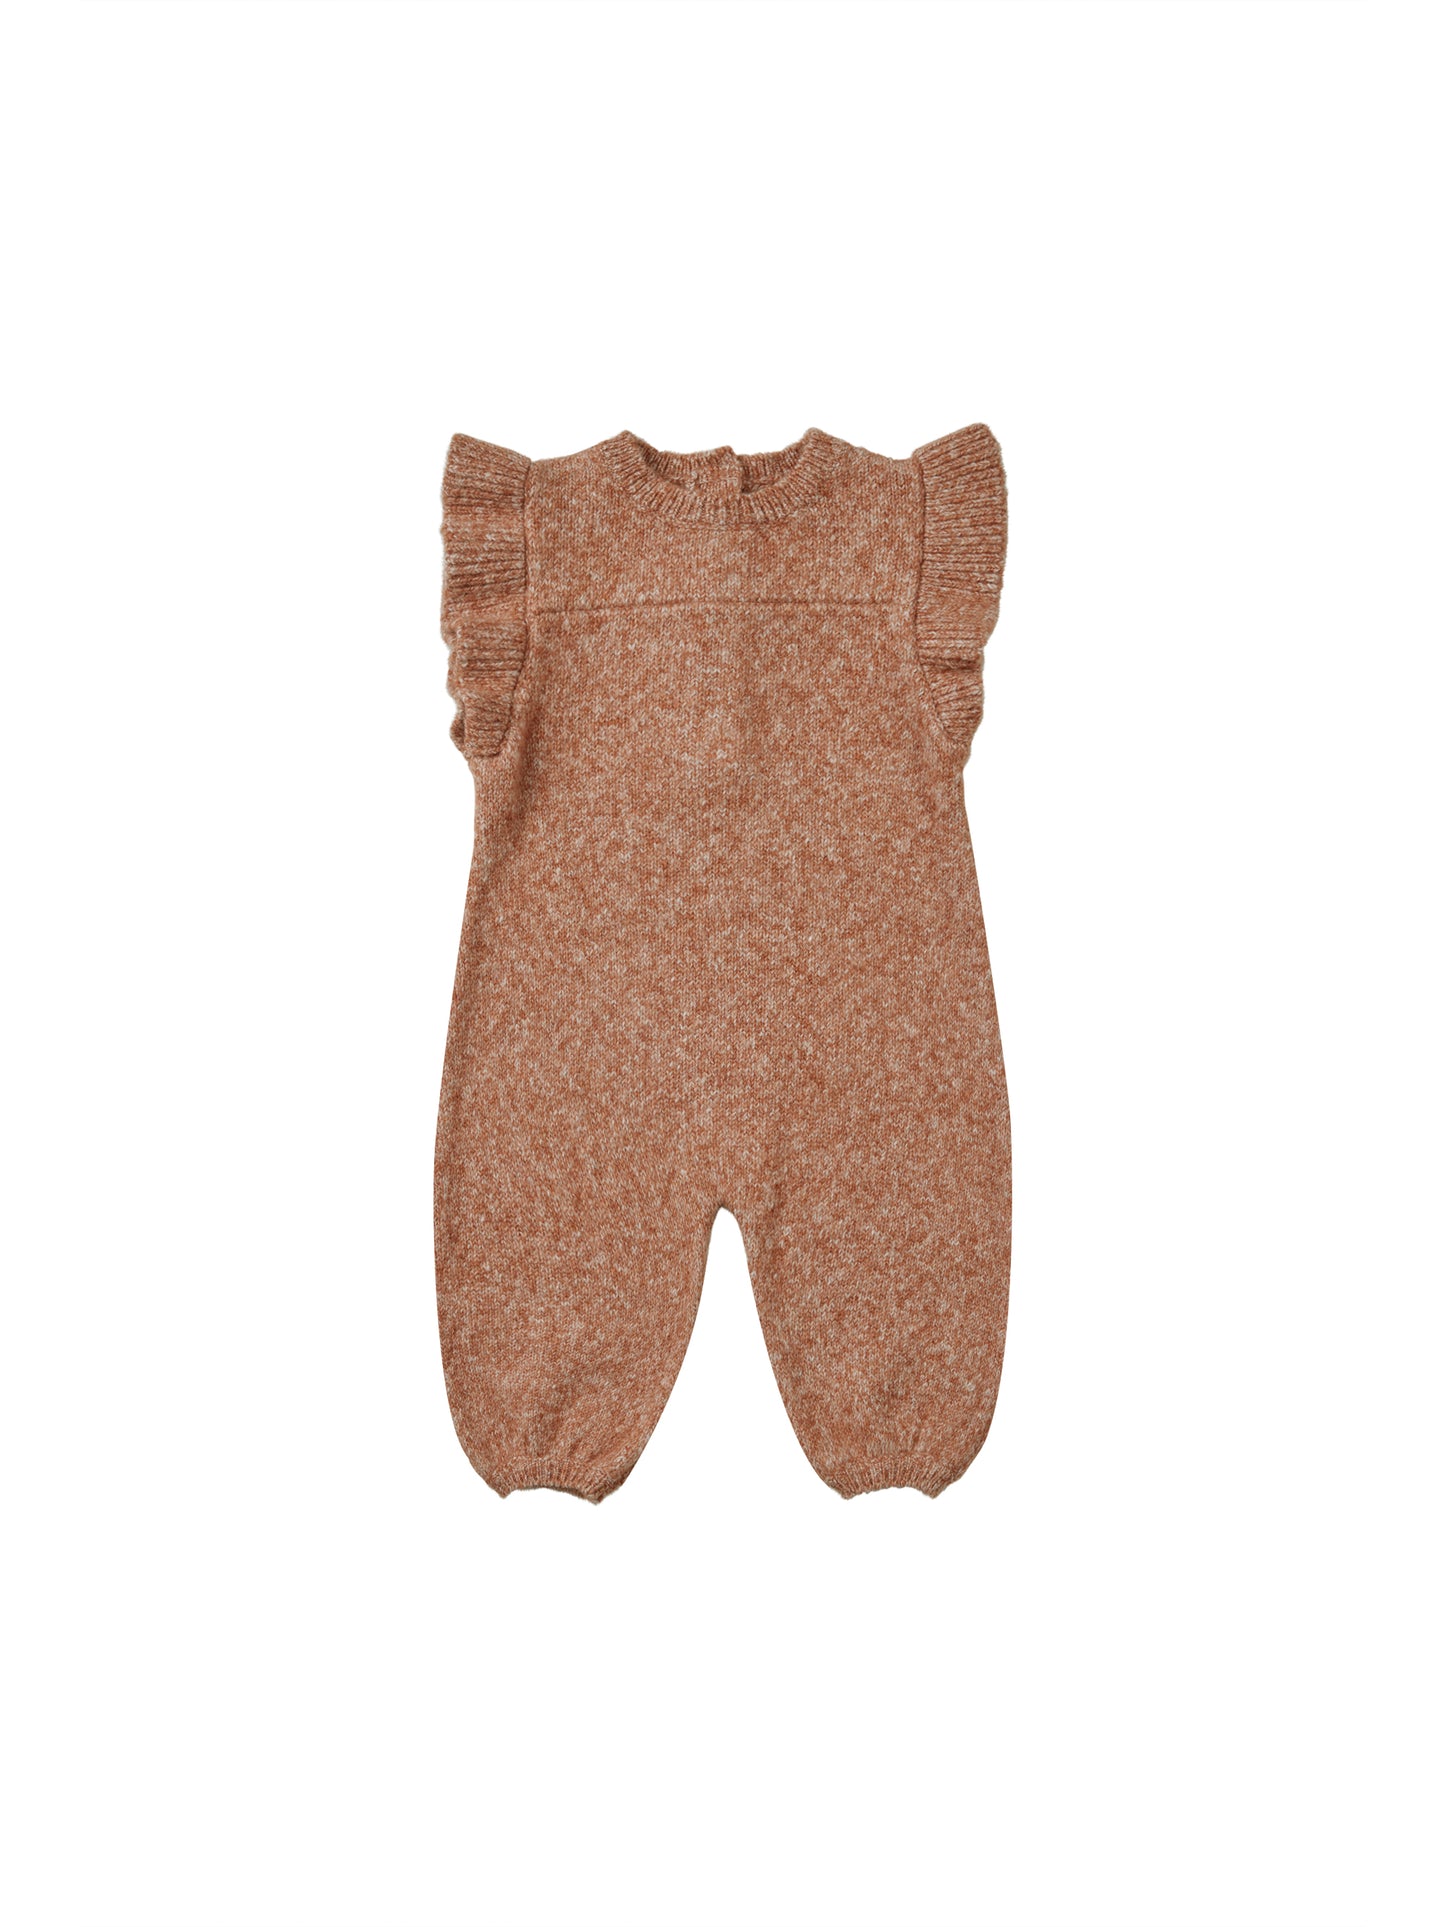 Quincy Mae Mira knit romper || heathered clay